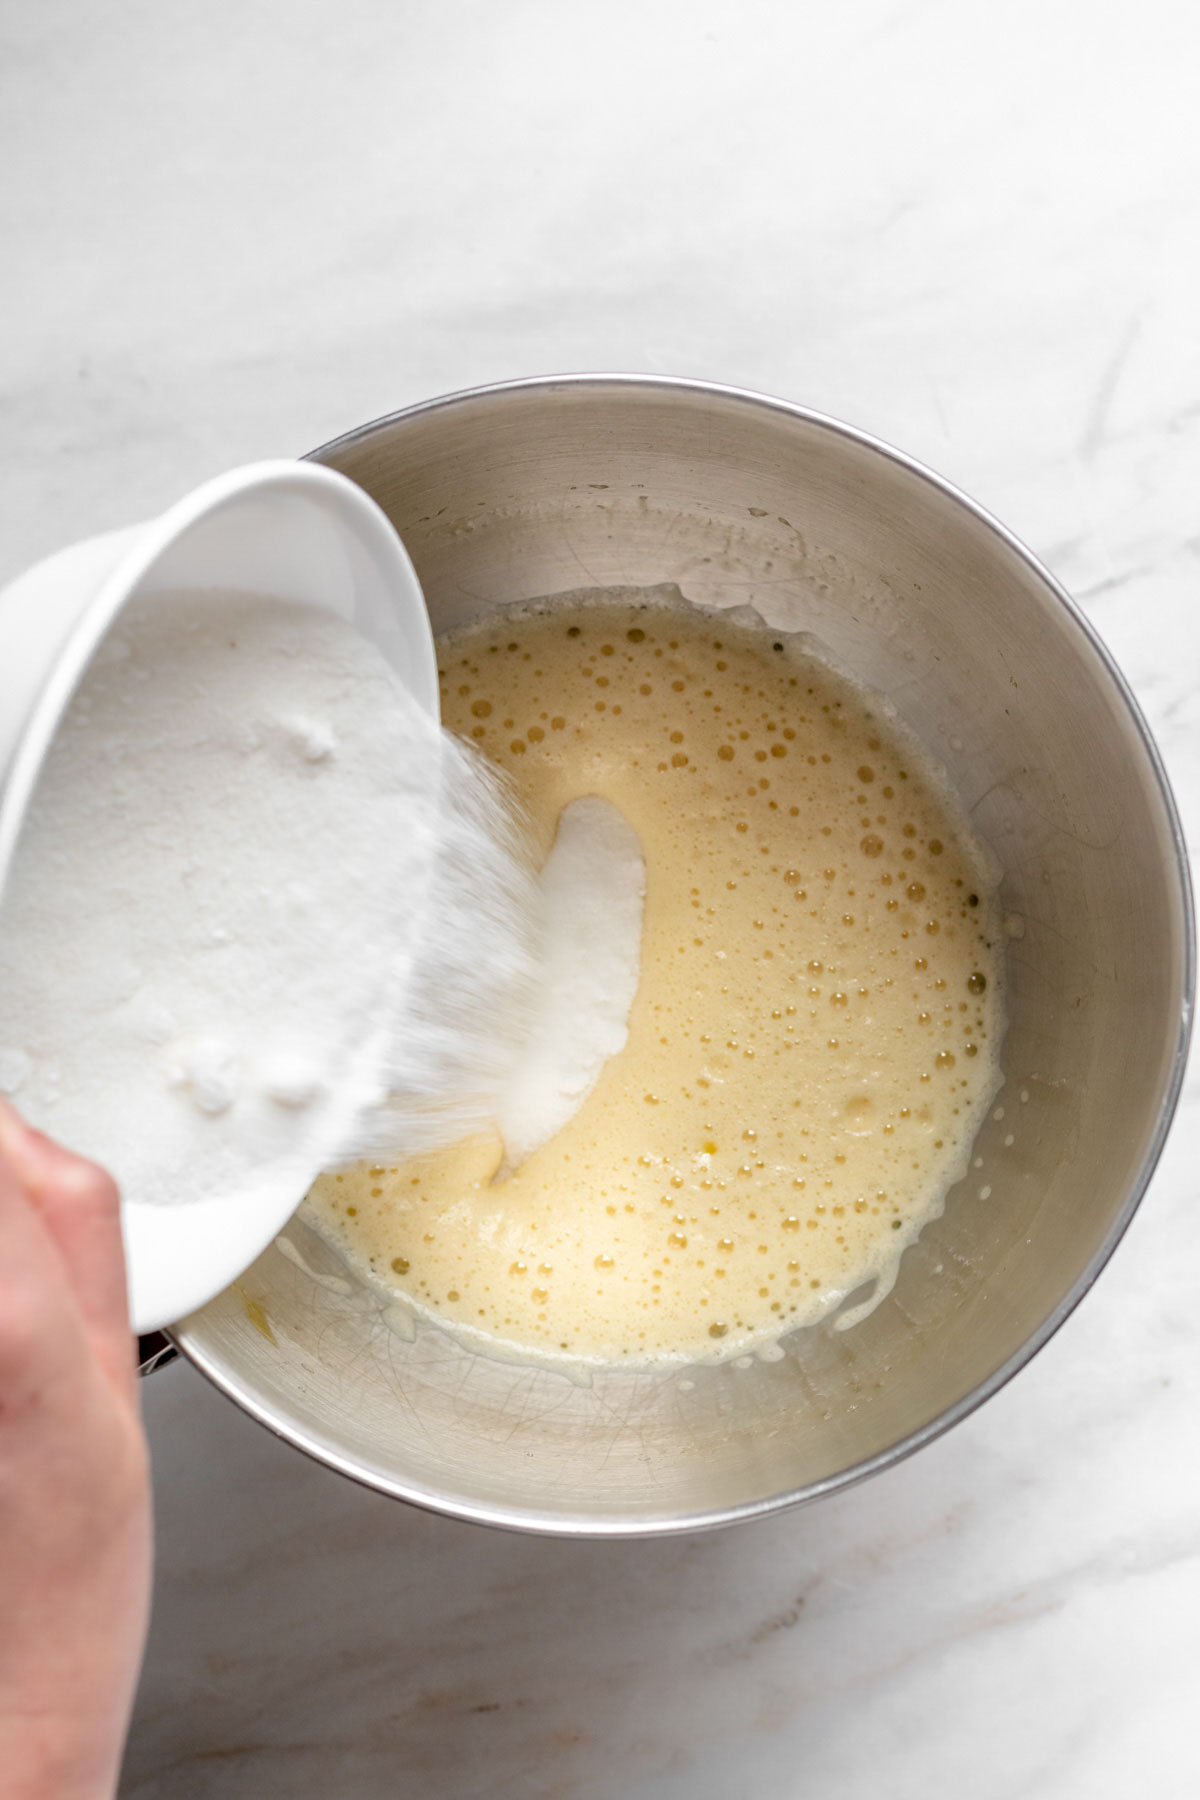 Sugar being added to the batter.